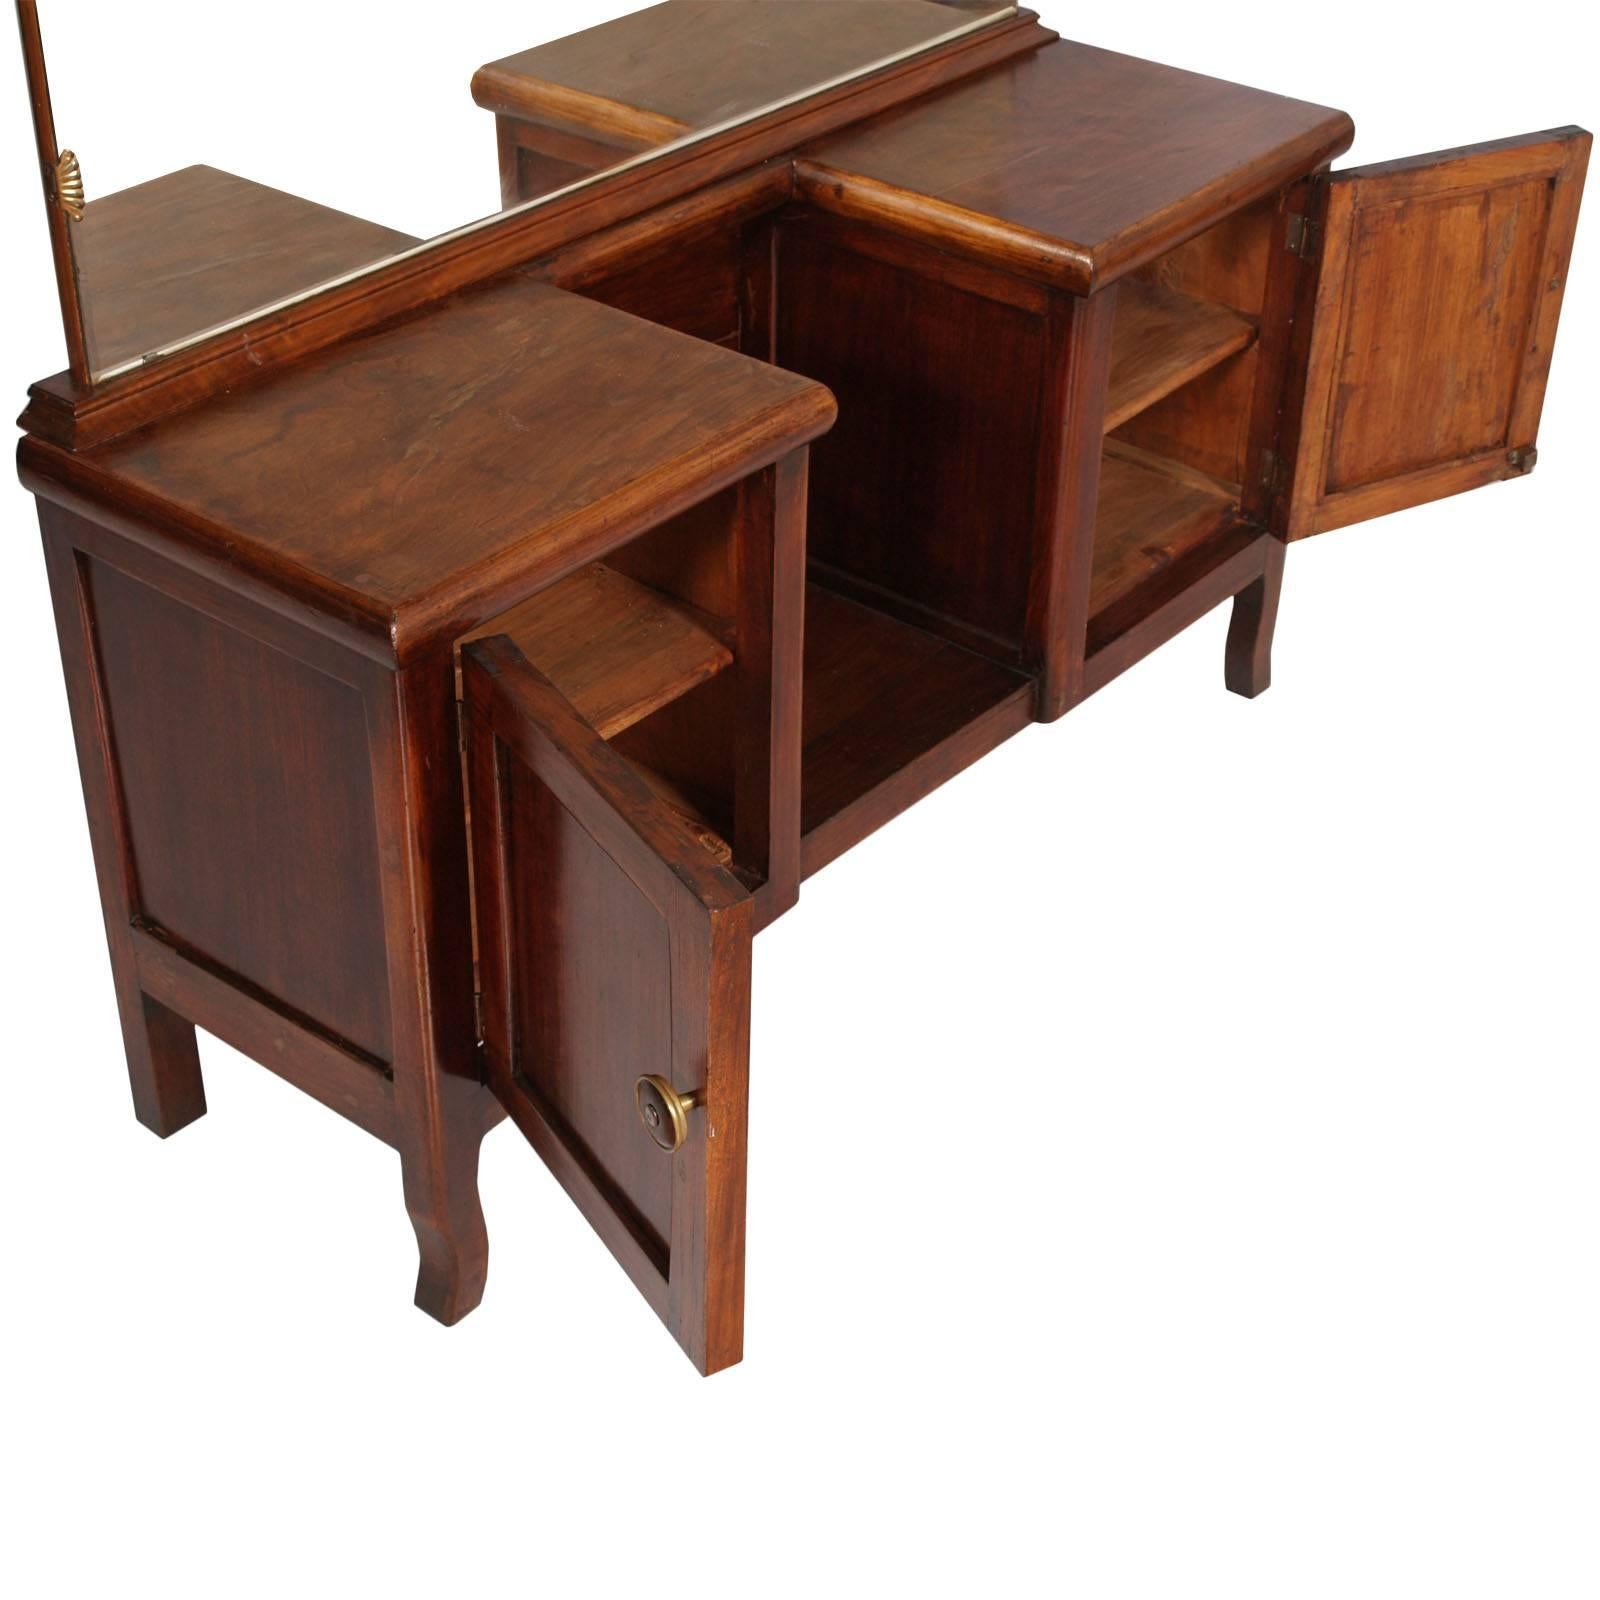 1930s Art Deco entry cabinet console table with mirror in walnut.

Measures cm: H 130, W 110, D 34.